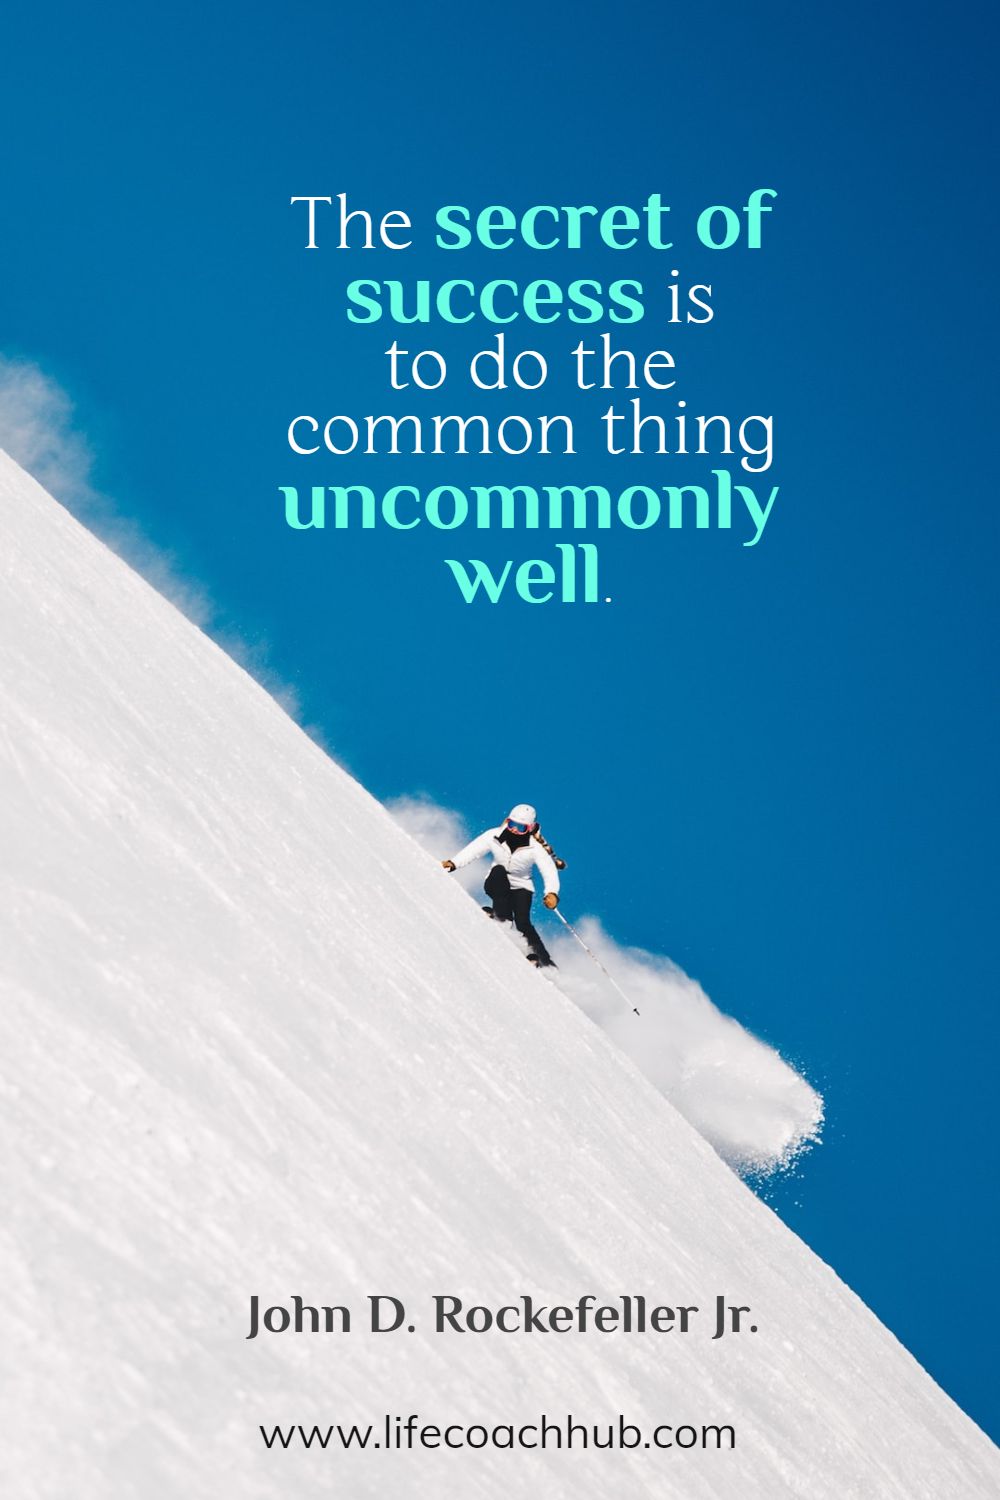 The secret of success is to do the common thing uncommonly well. John D. Rockefeller Jr. Coaching Quote